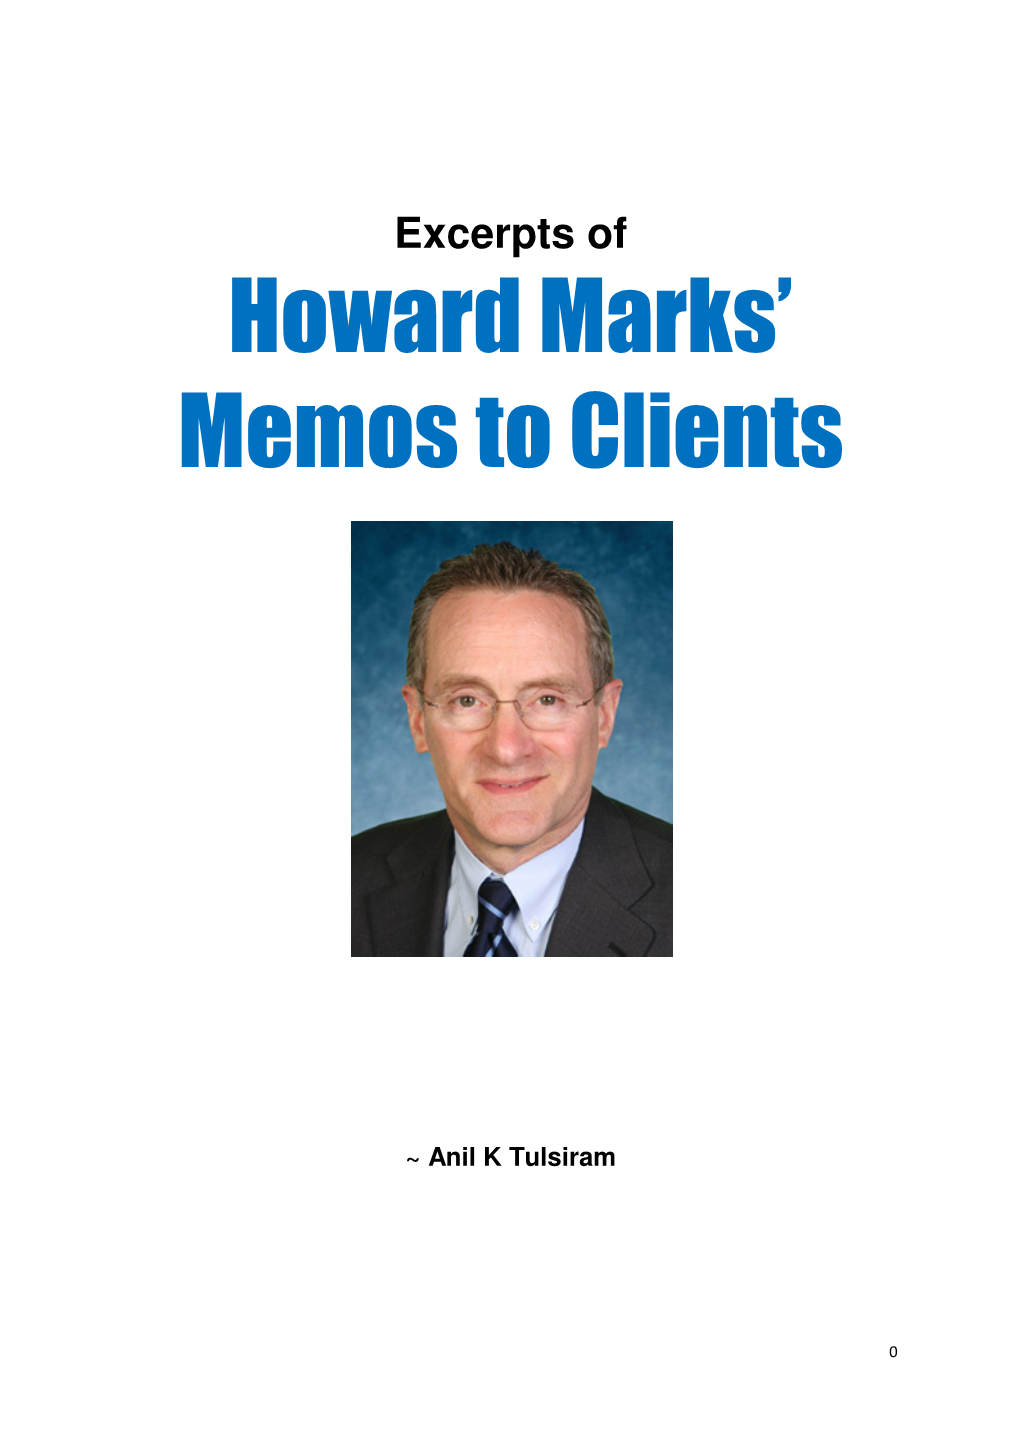 Howard Marks' Memos to Clients